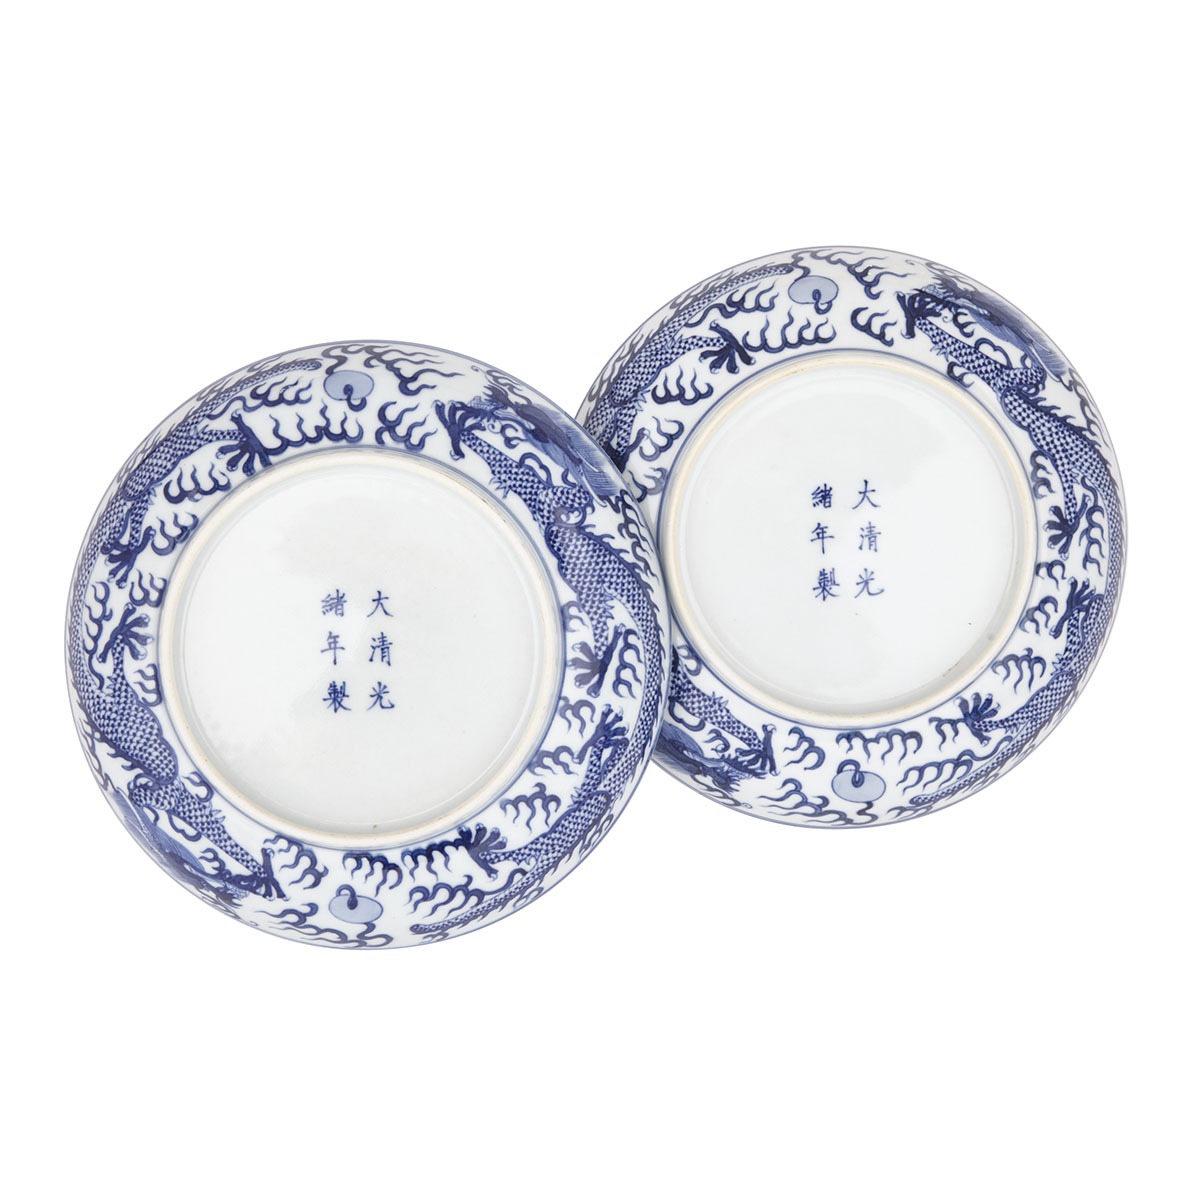 A Pair of Blue and White 'Dragon' Dishes, Guangxu Mark